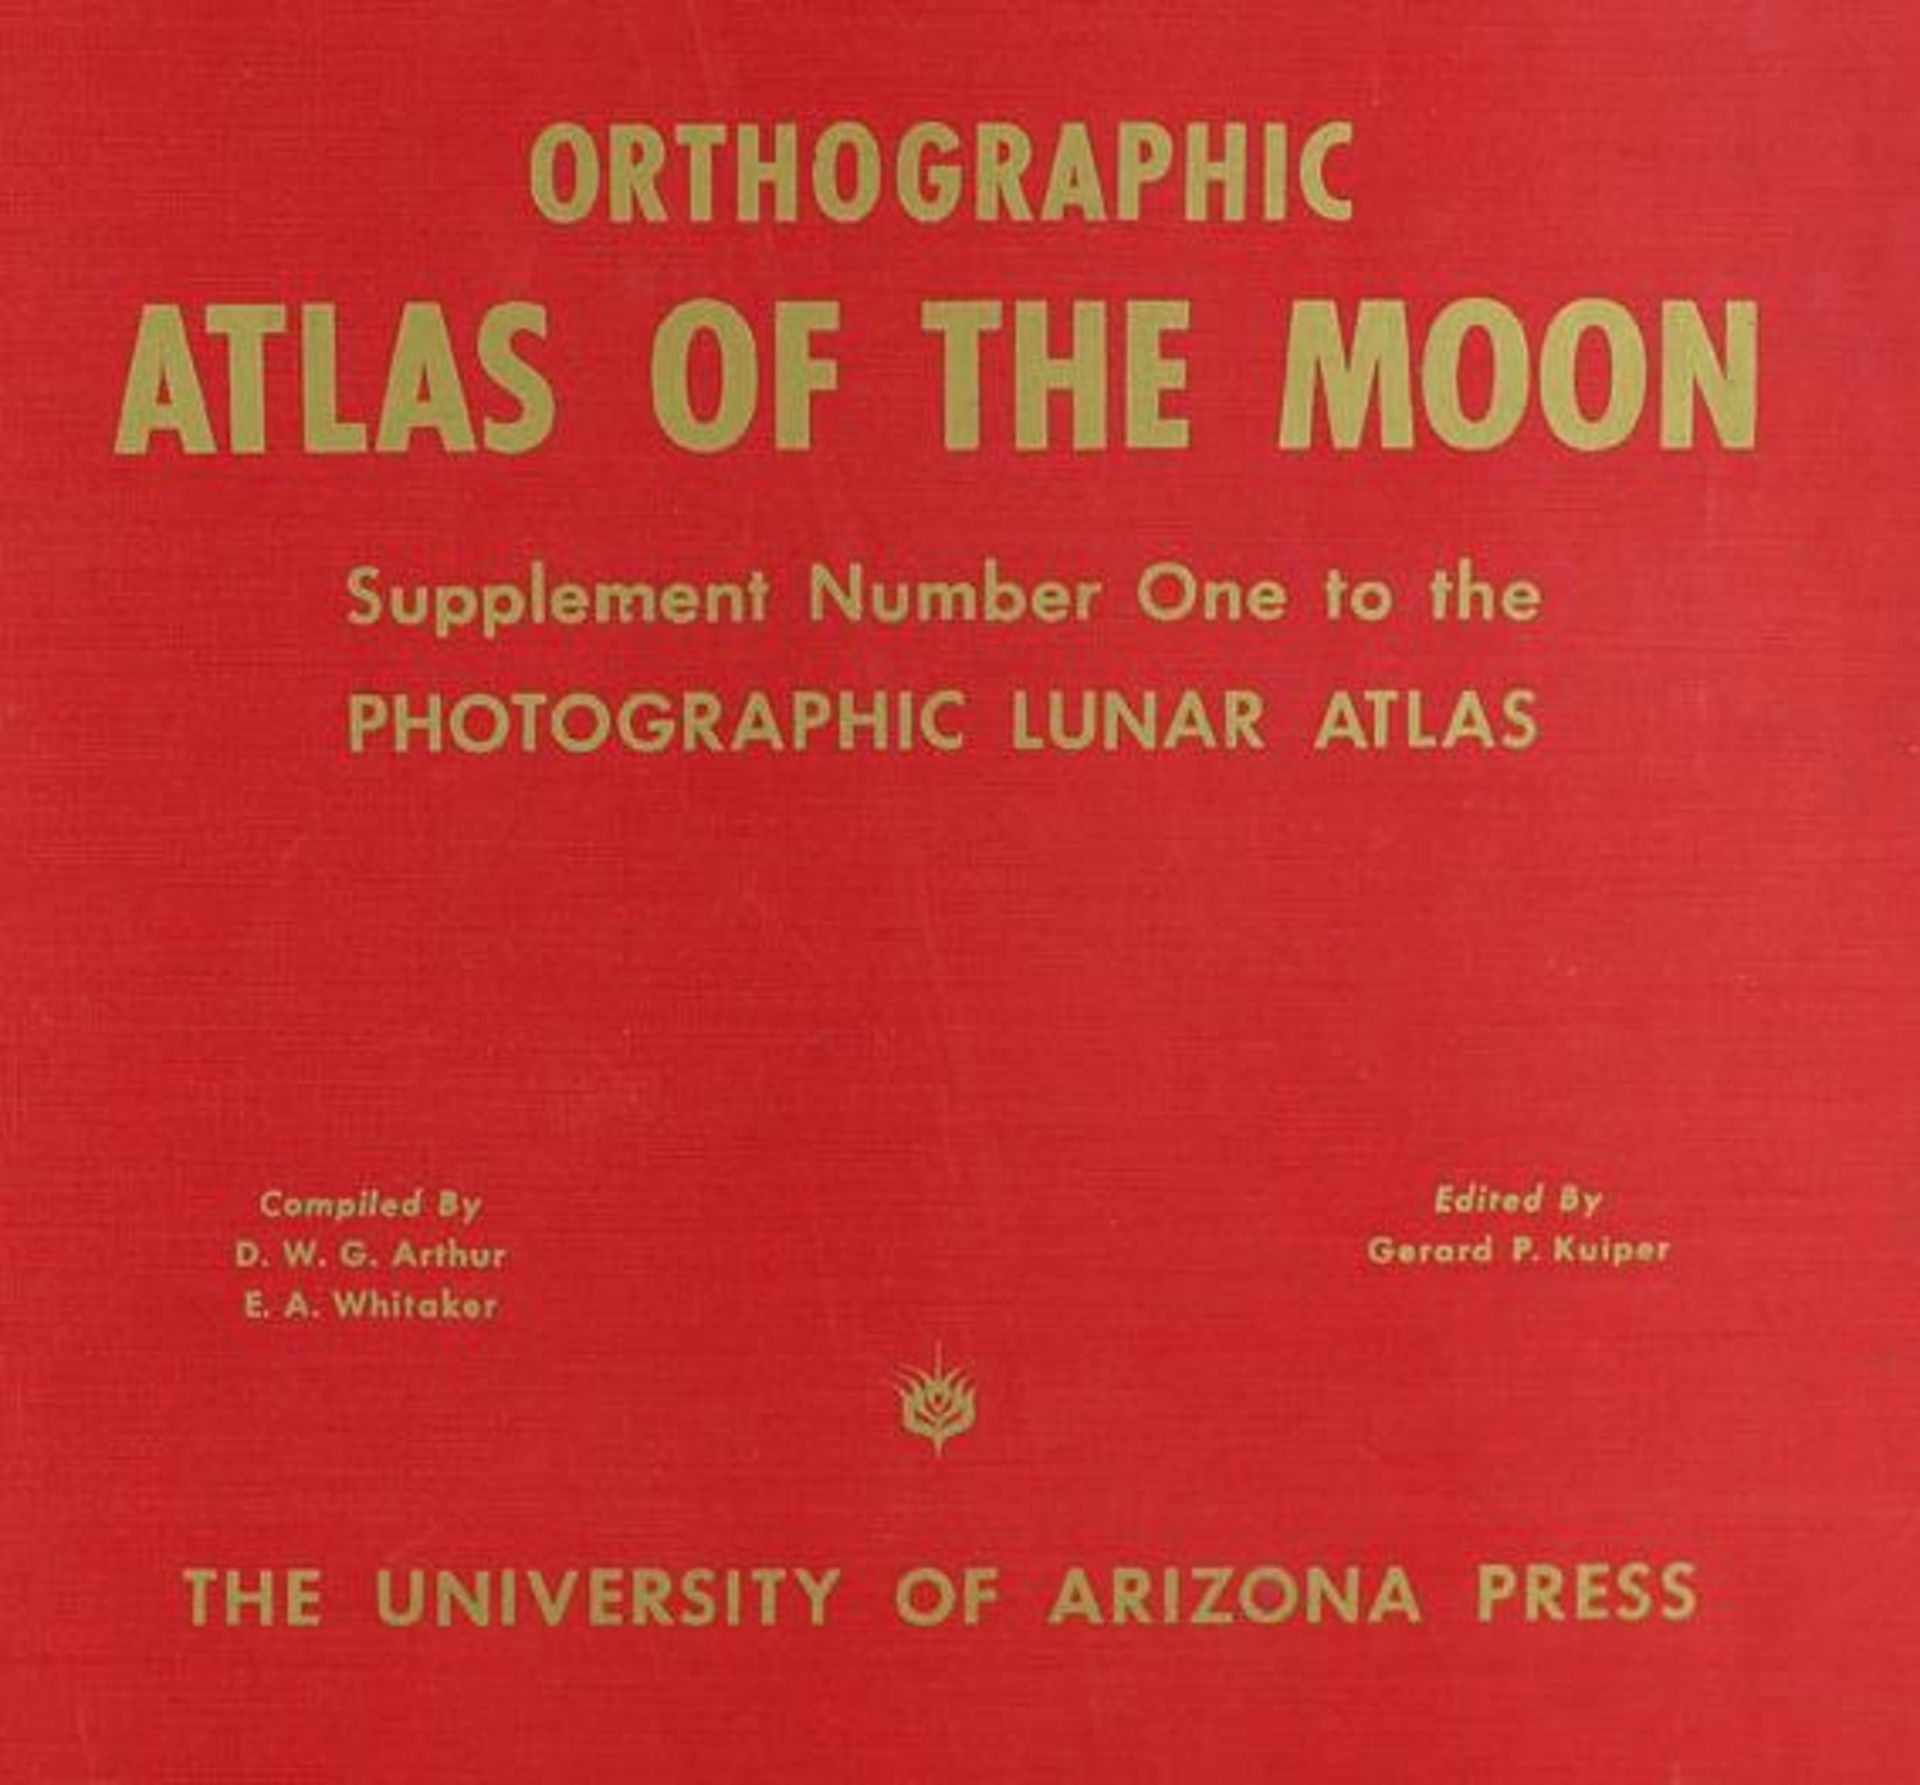 Kuiper,G.P.Orthographic Atlas of the Moon - Supplement Number One to the Photographic Lunar Atlas.